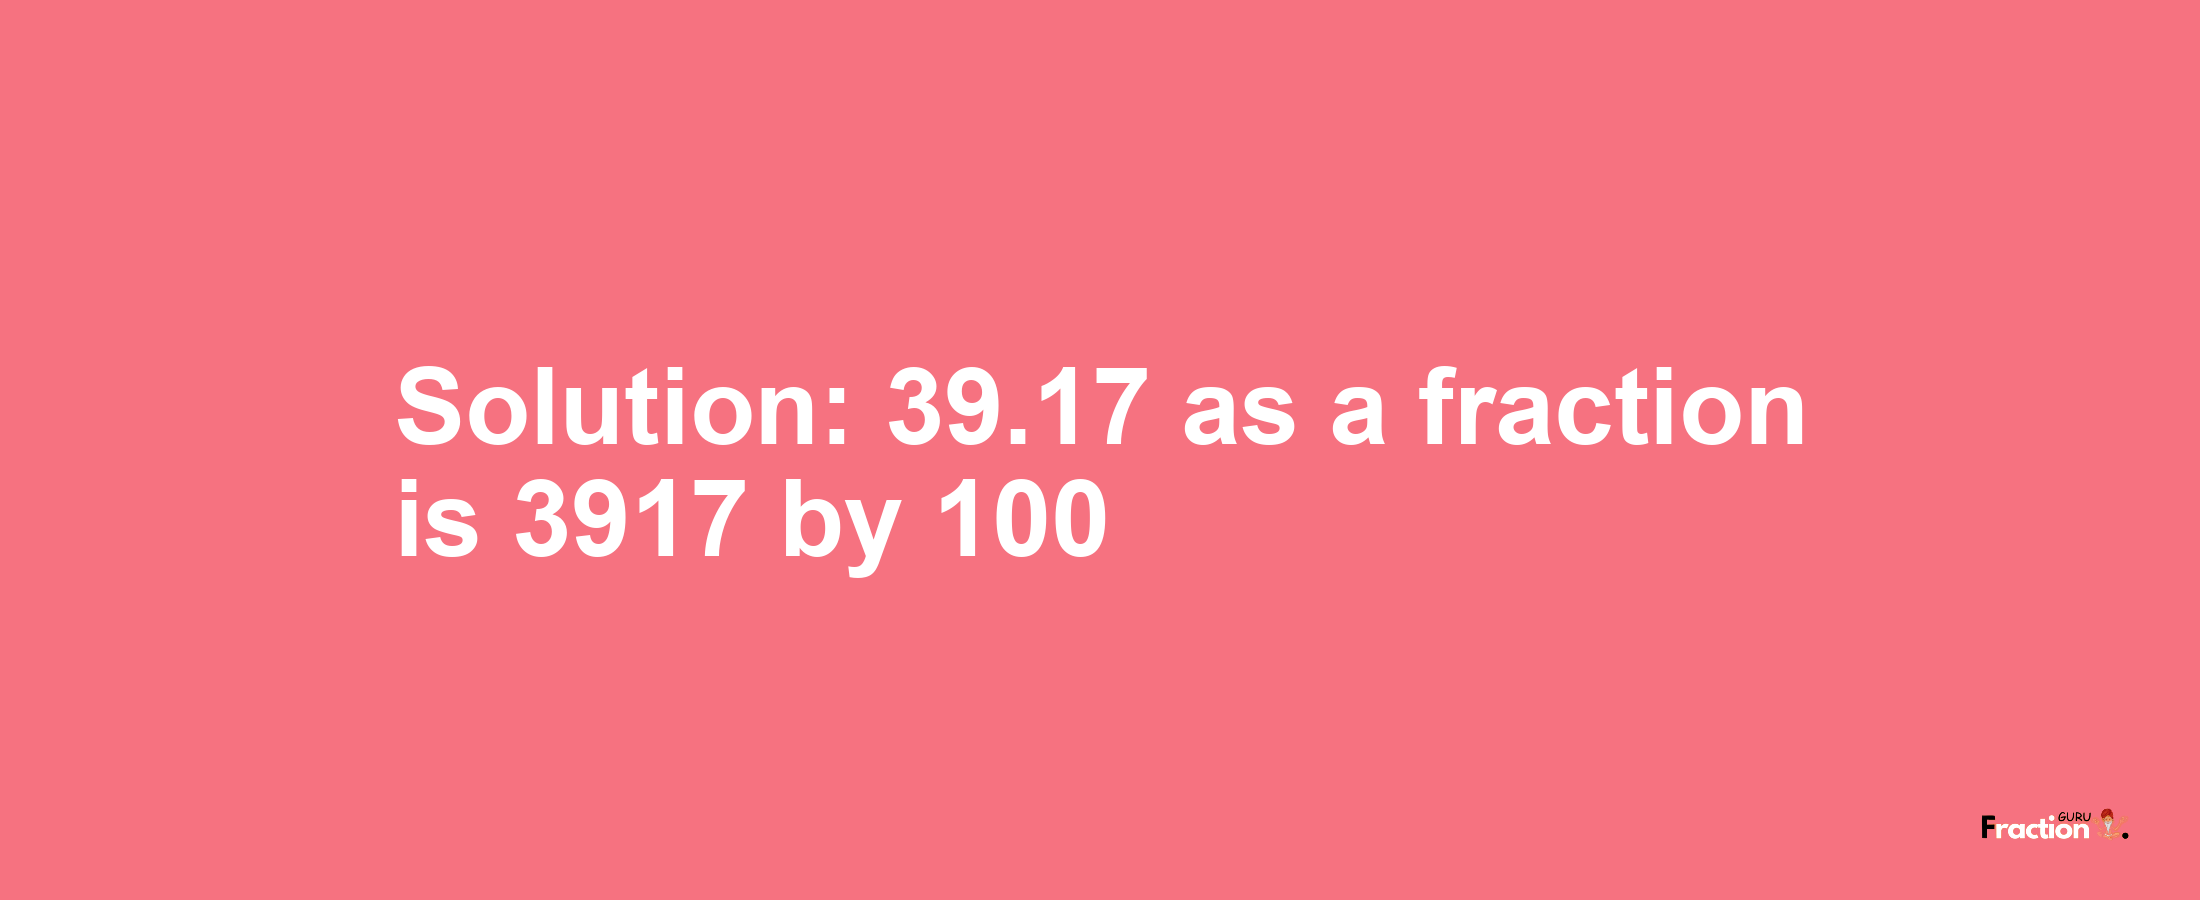 Solution:39.17 as a fraction is 3917/100